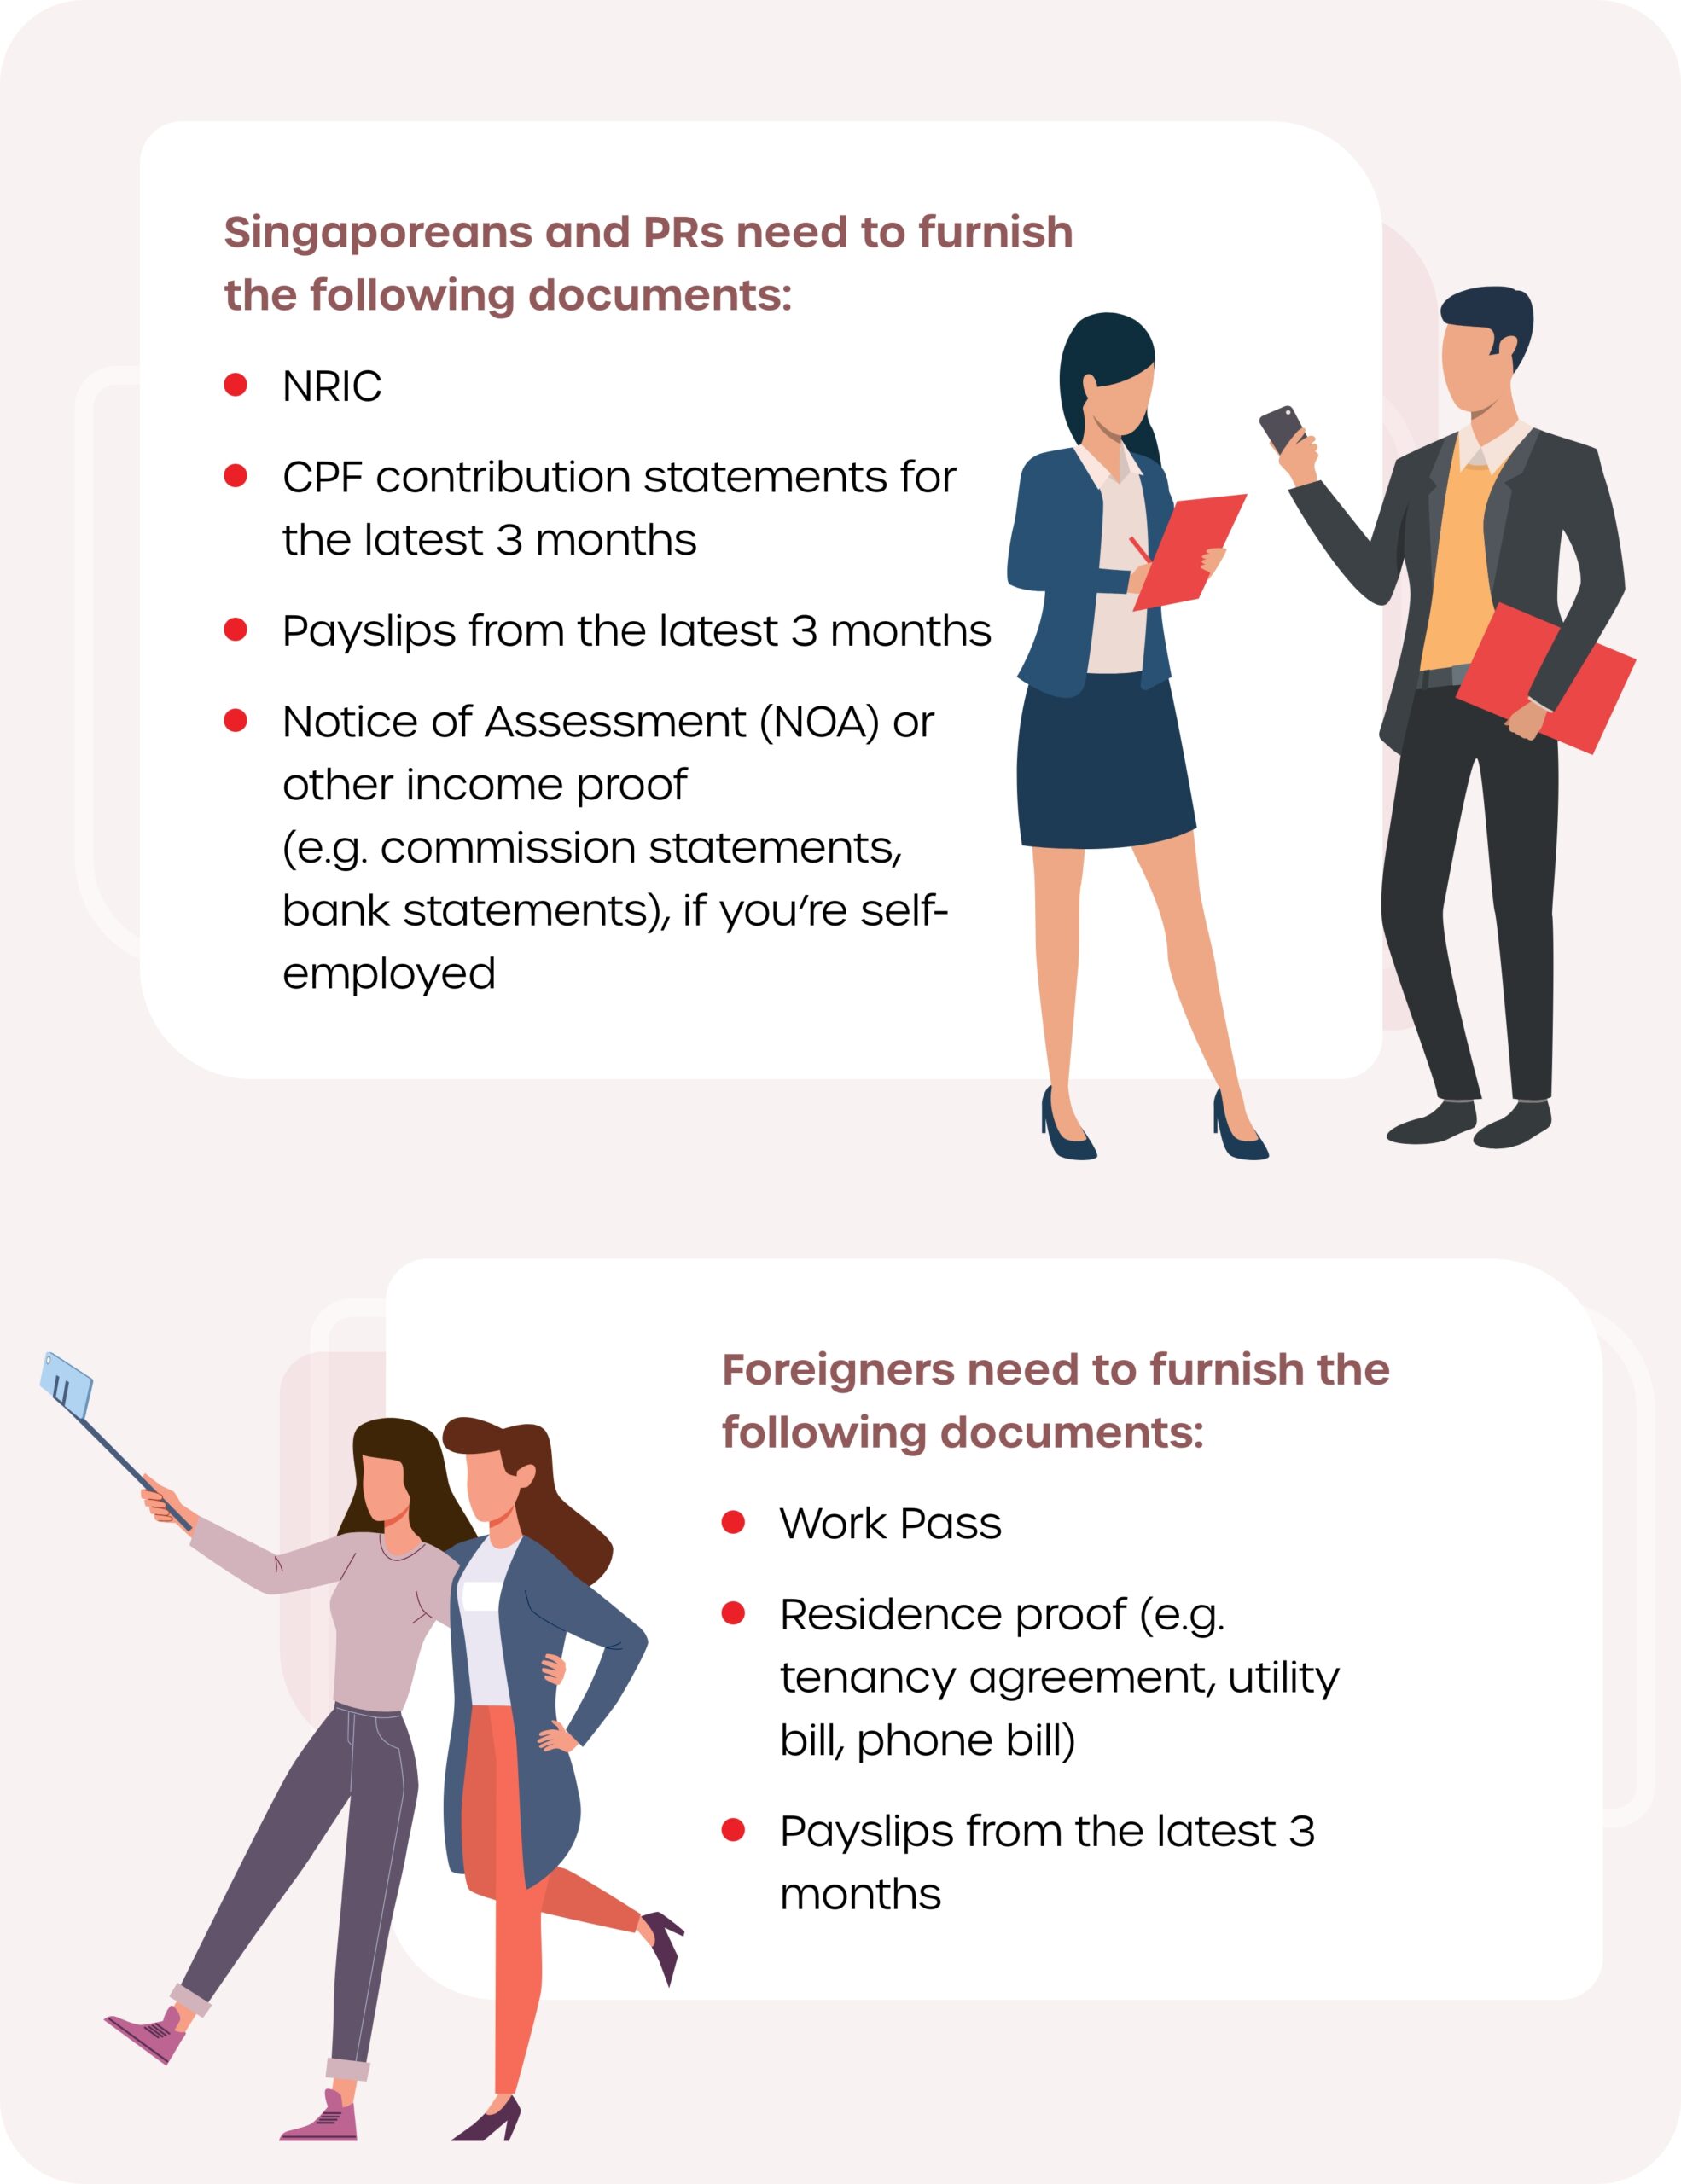 An infographic of the documents required of Singaporeans, PRs and foreigners when applying for a loan